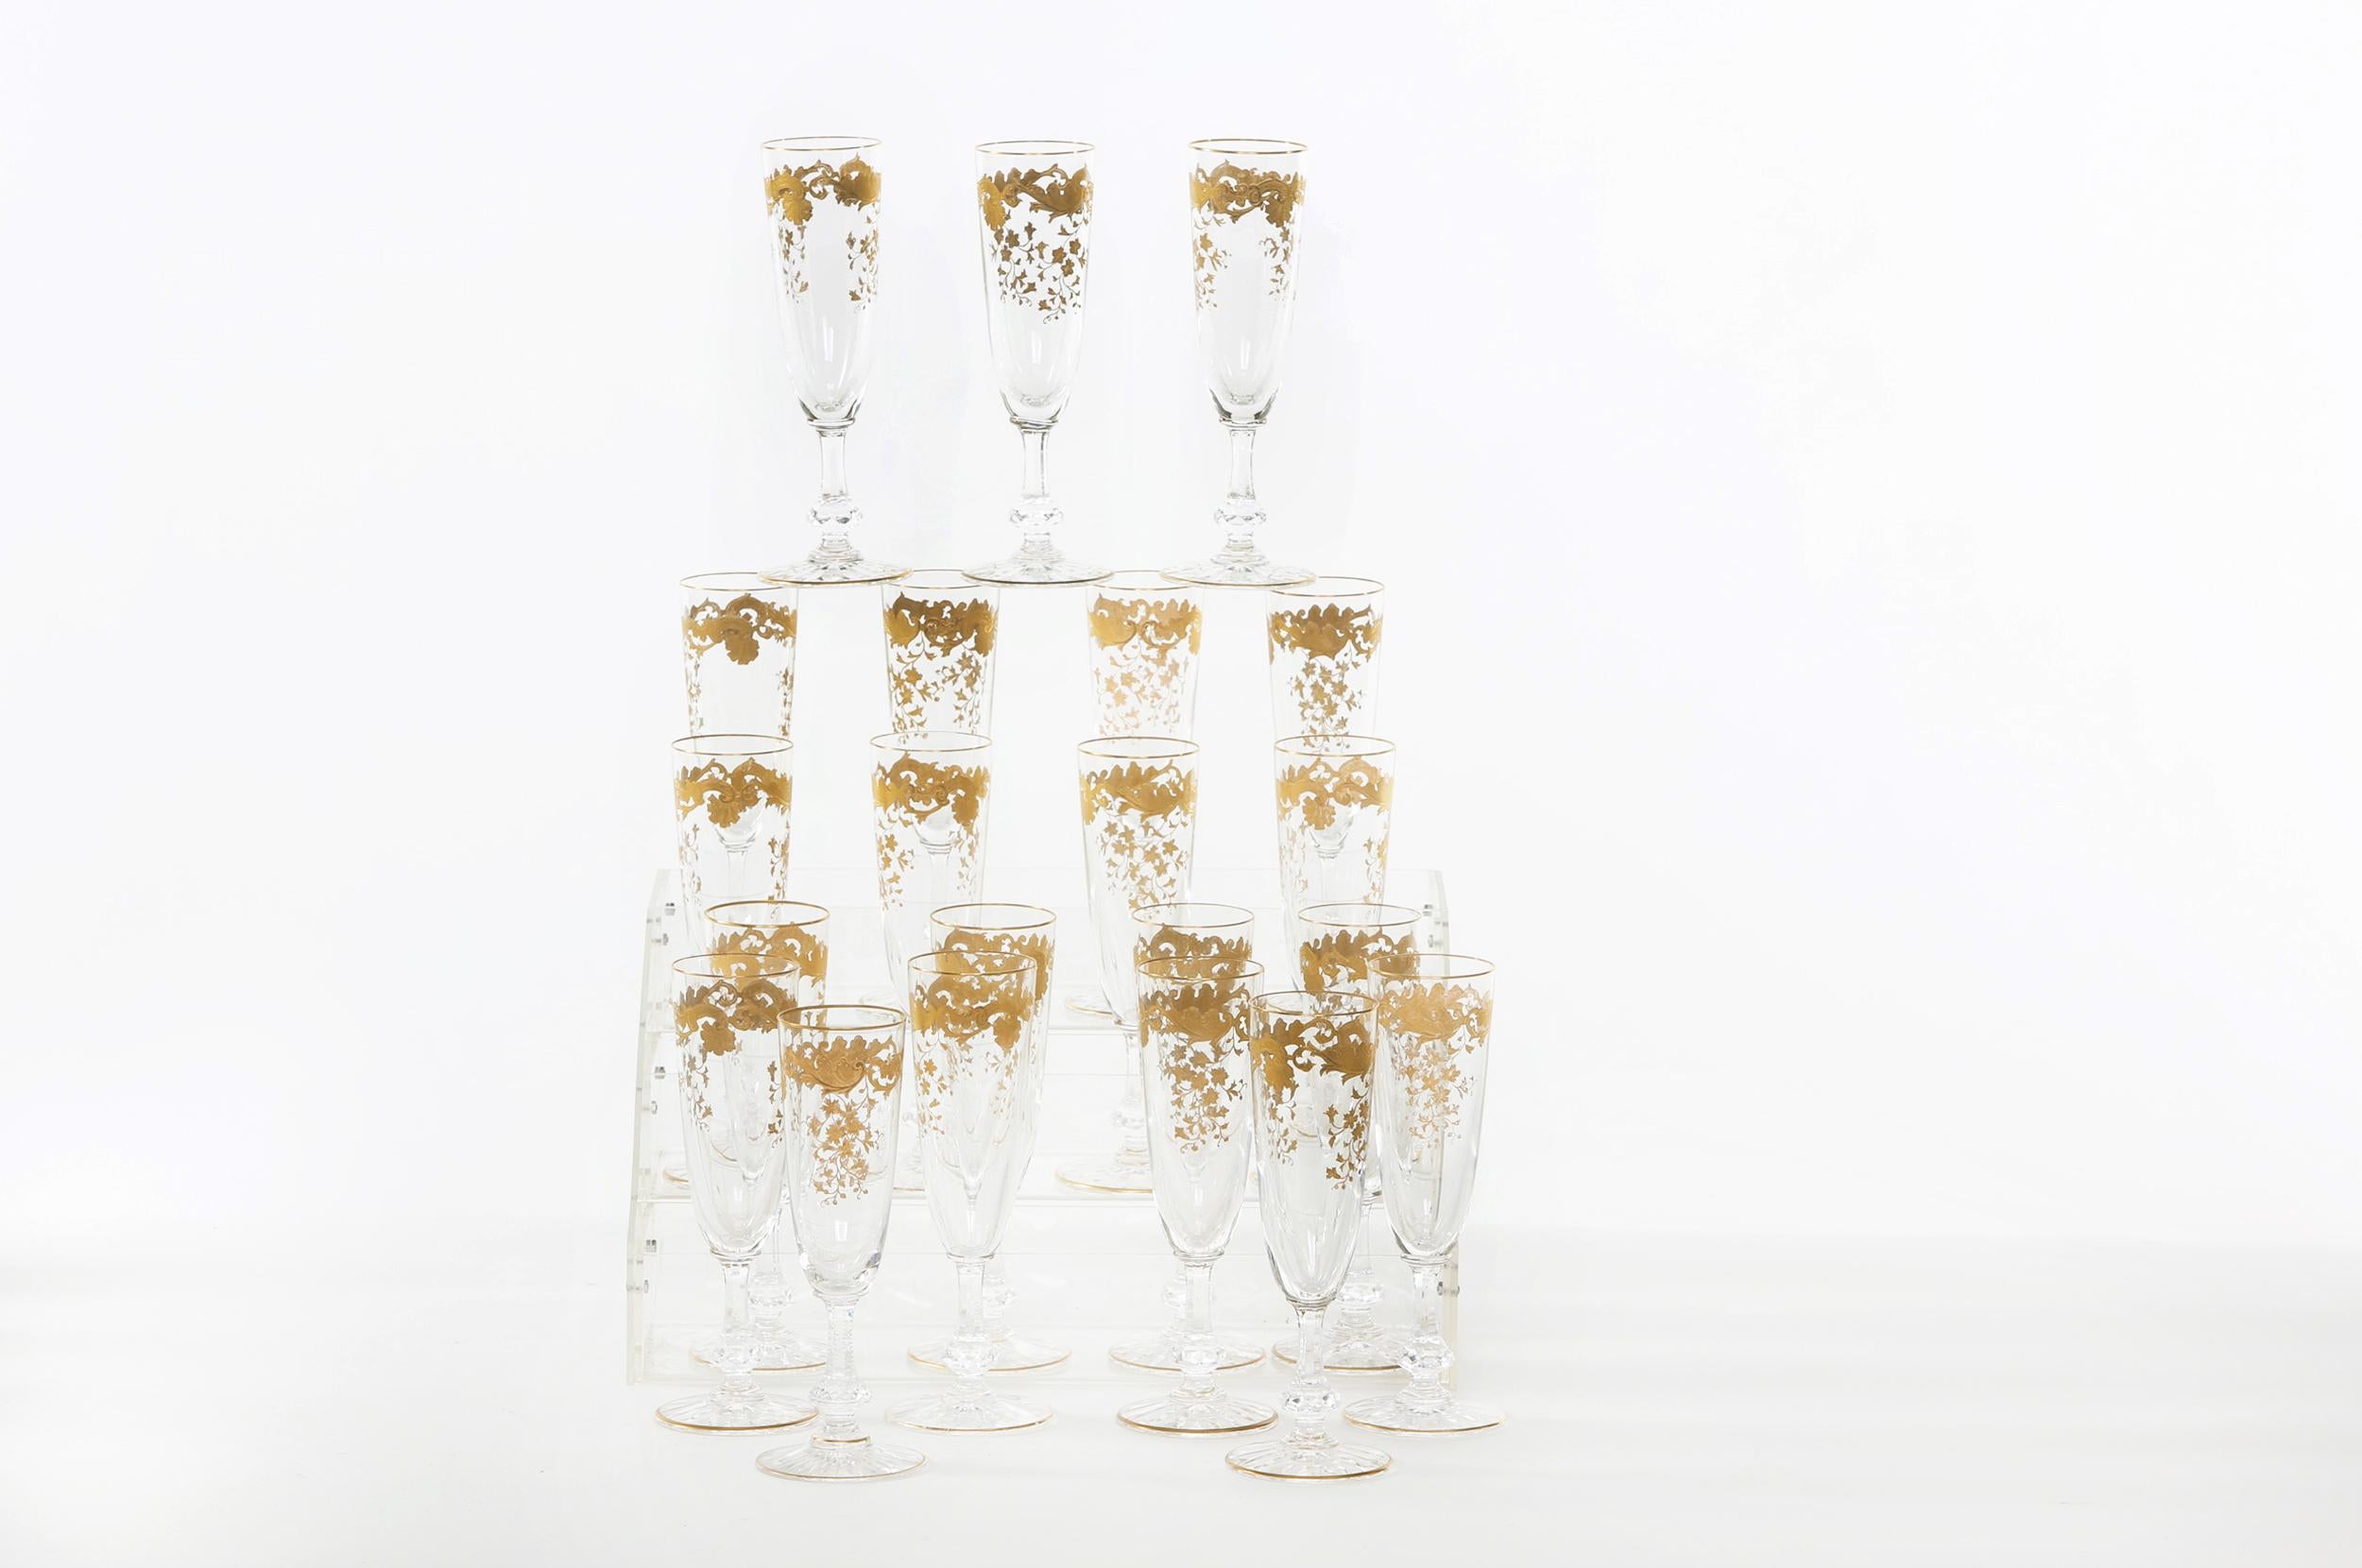 Mid-20th century Saint Louis crystal with gold design details tableware / barware champagne flute service for twenty people. Each one is in great condition. Maker's mark stamped undersigned. Each one stands about 7 inches tall x 2.5 inches diameter.